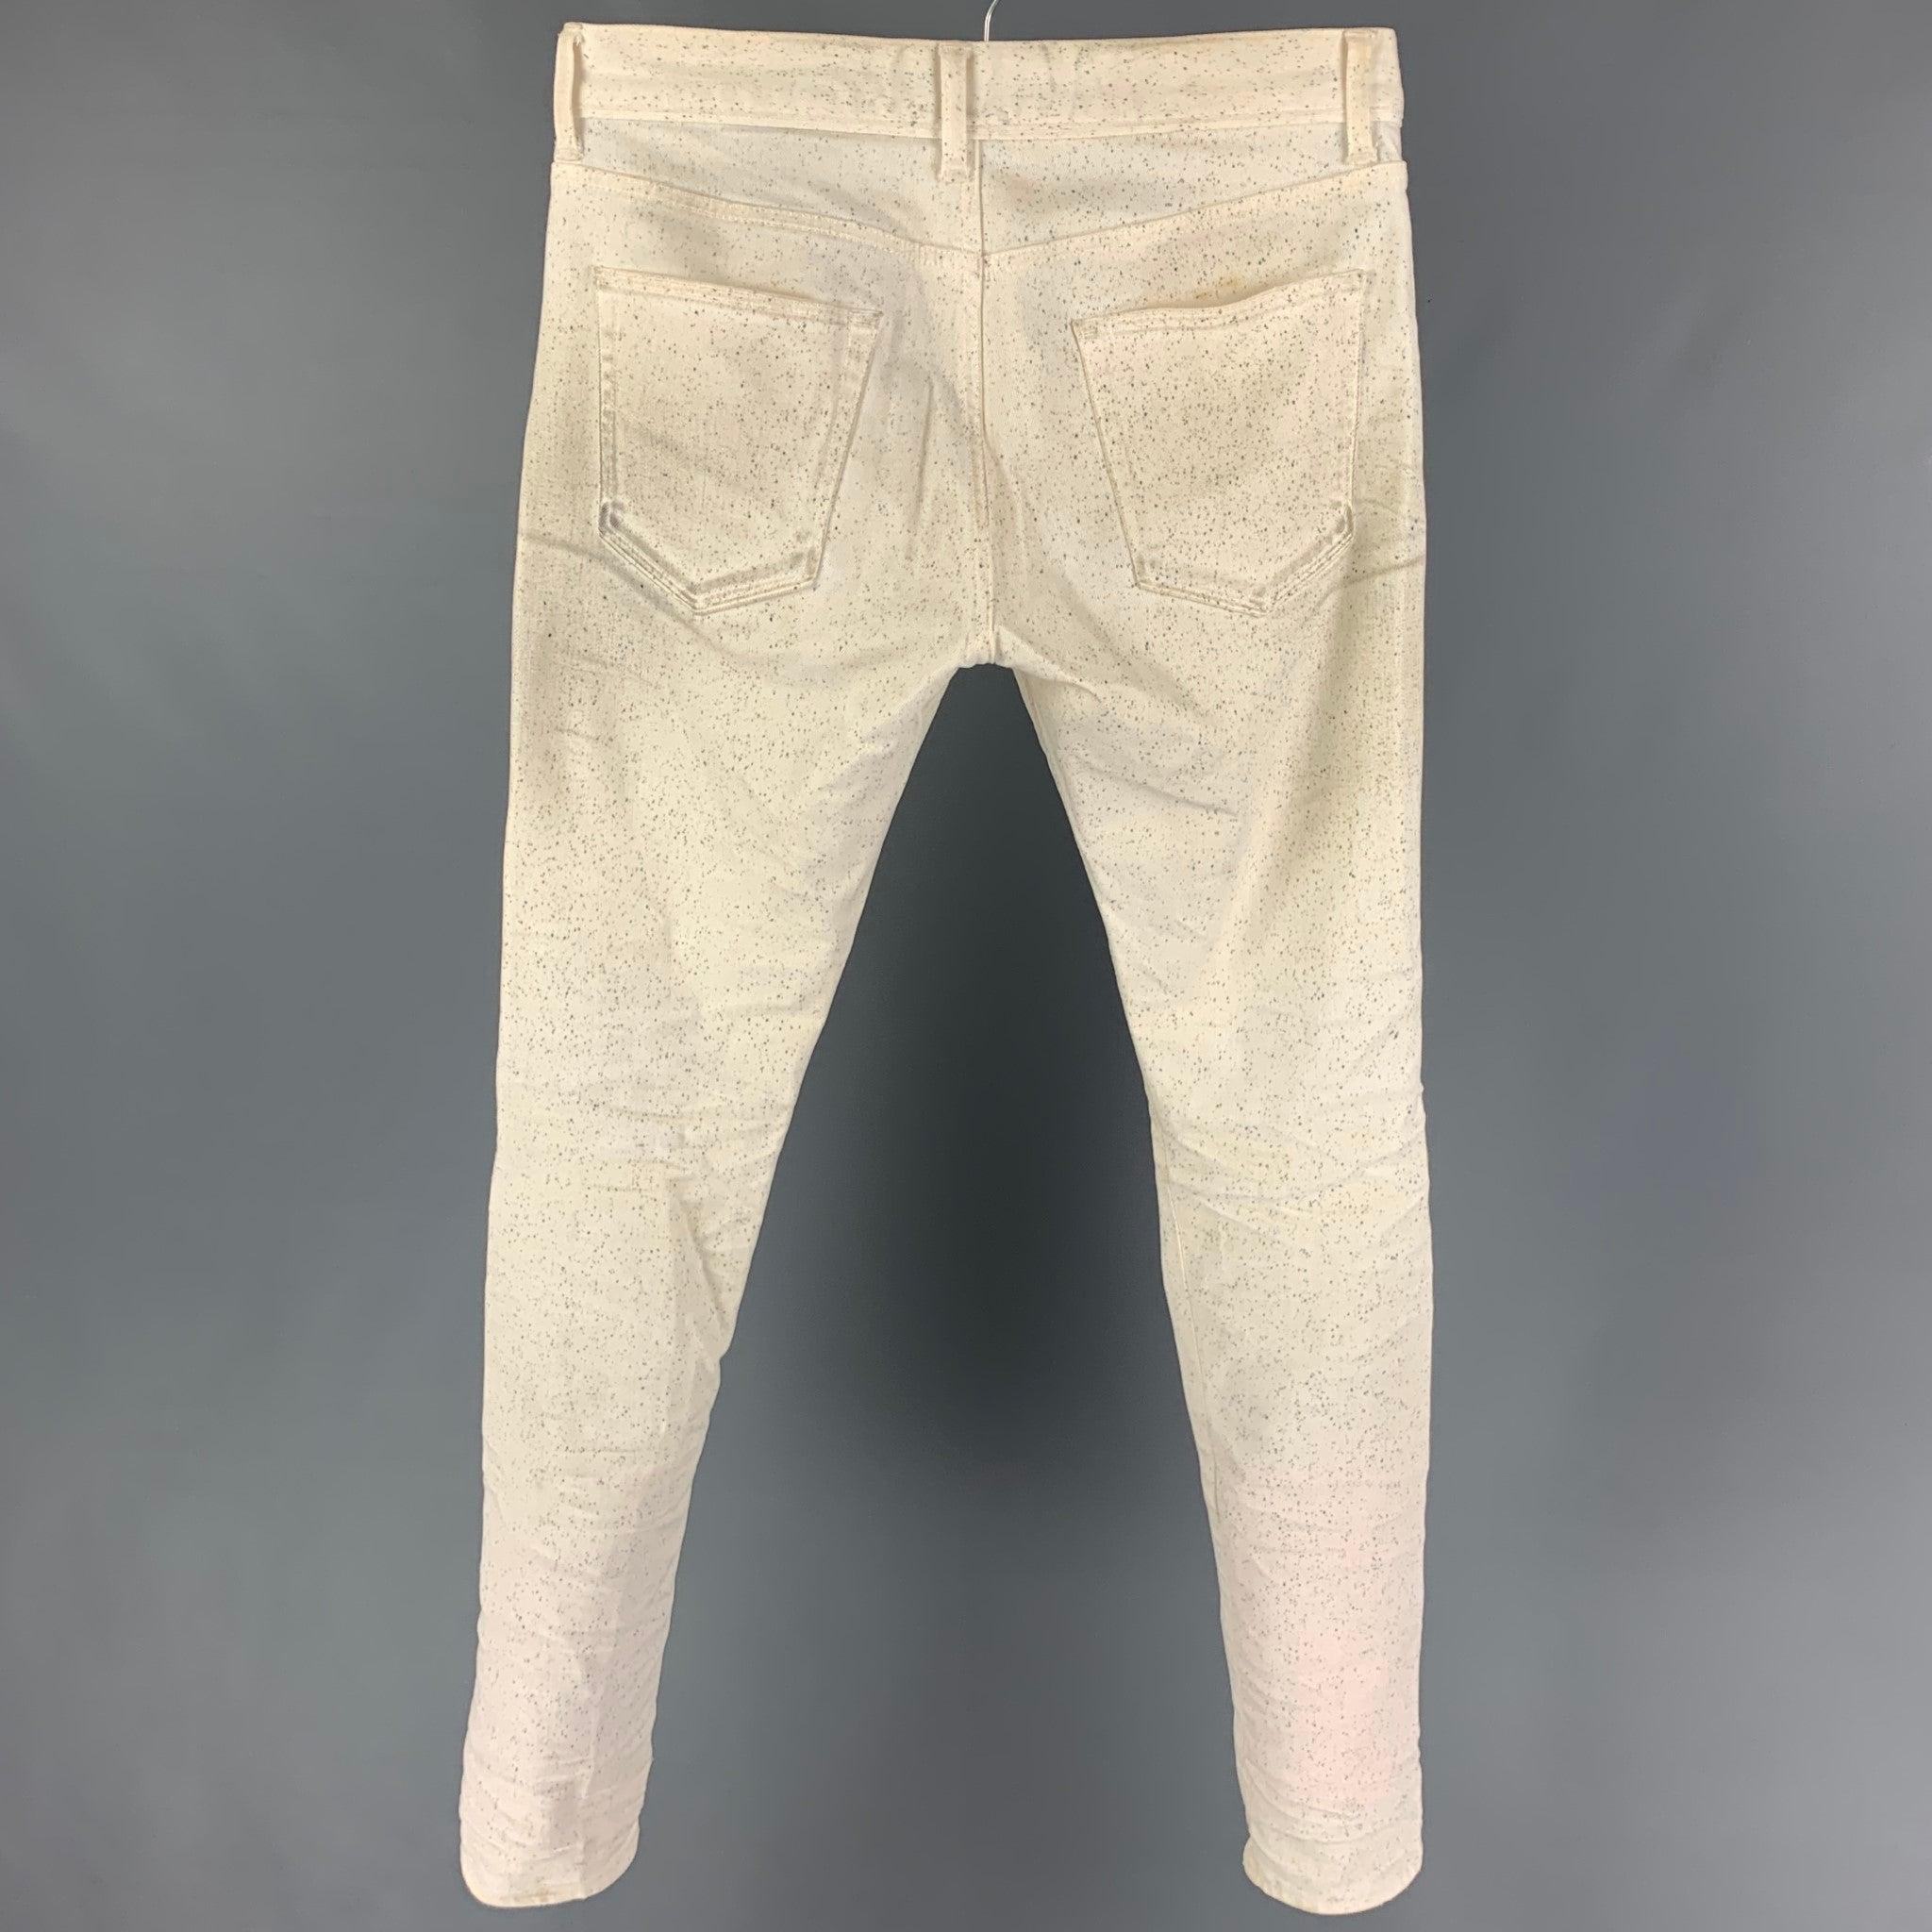 JOHN ELLIOTT 'Season Nine' jeans comes in a off white & black paint splatter cotton featuring a skinny fit, distressed details, and a button fly closure. Made in Japan. Good
Pre-Owned Condition. 

Marked:   30 

Measurements: 
  Waist: 32 inches 